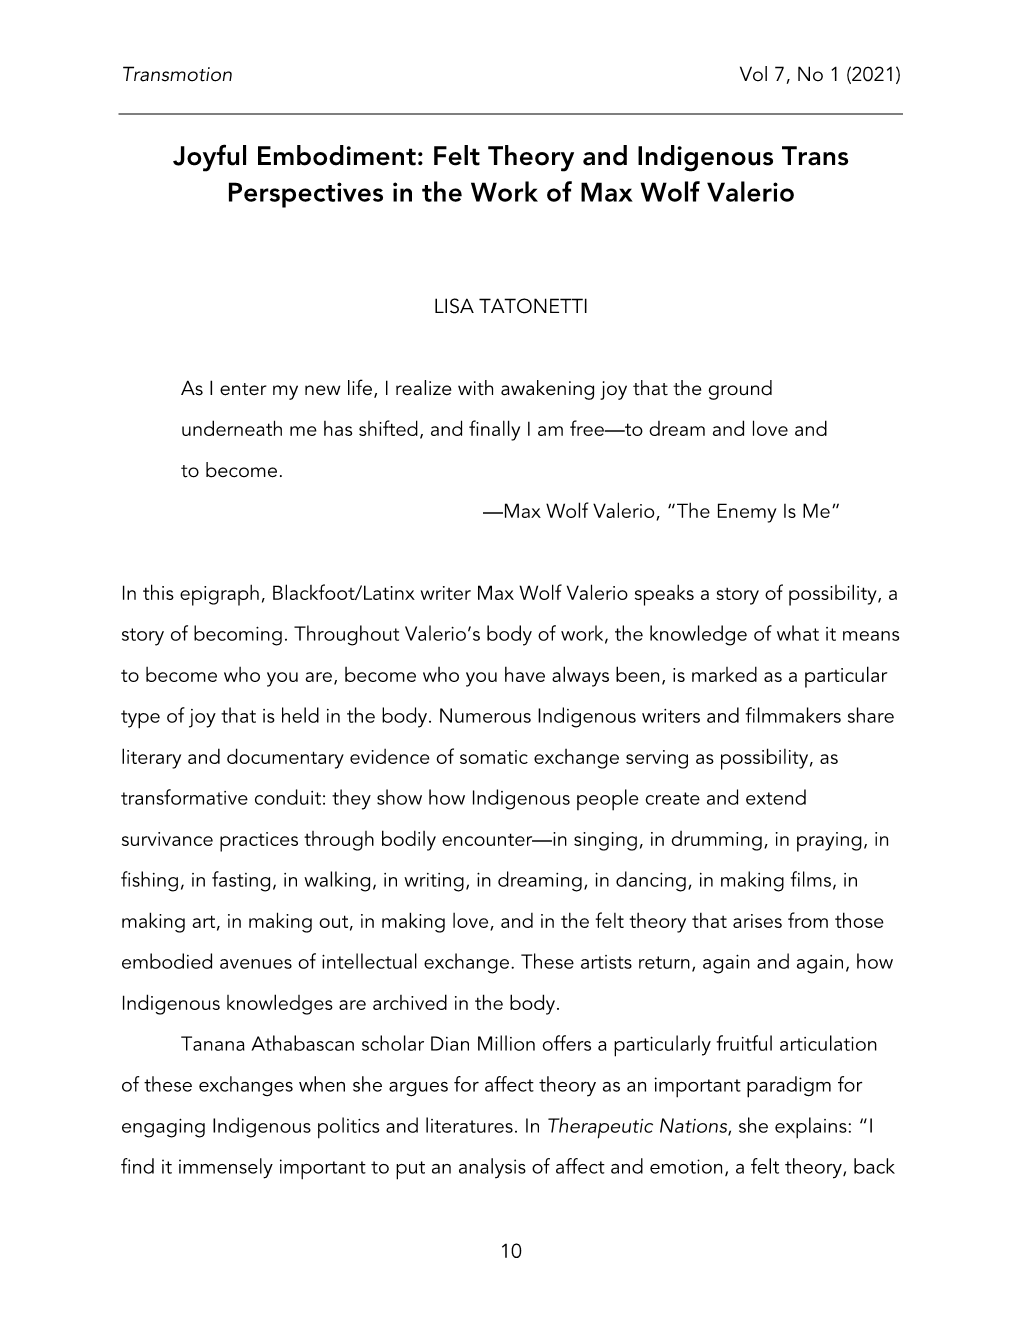 Felt Theory and Indigenous Trans Perspectives in the Work of Max Wolf Valerio